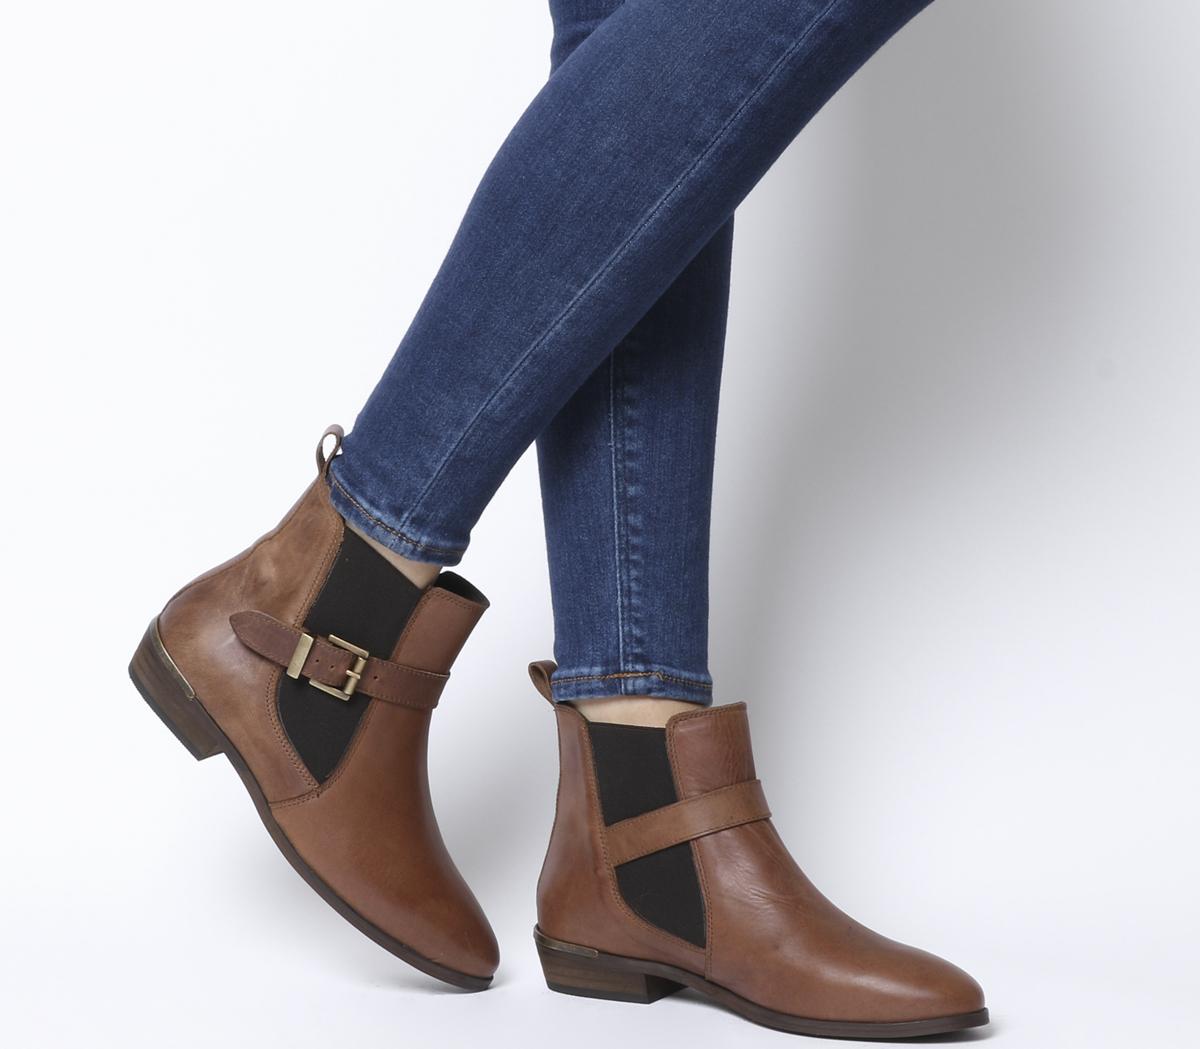 womens flat buckle boots